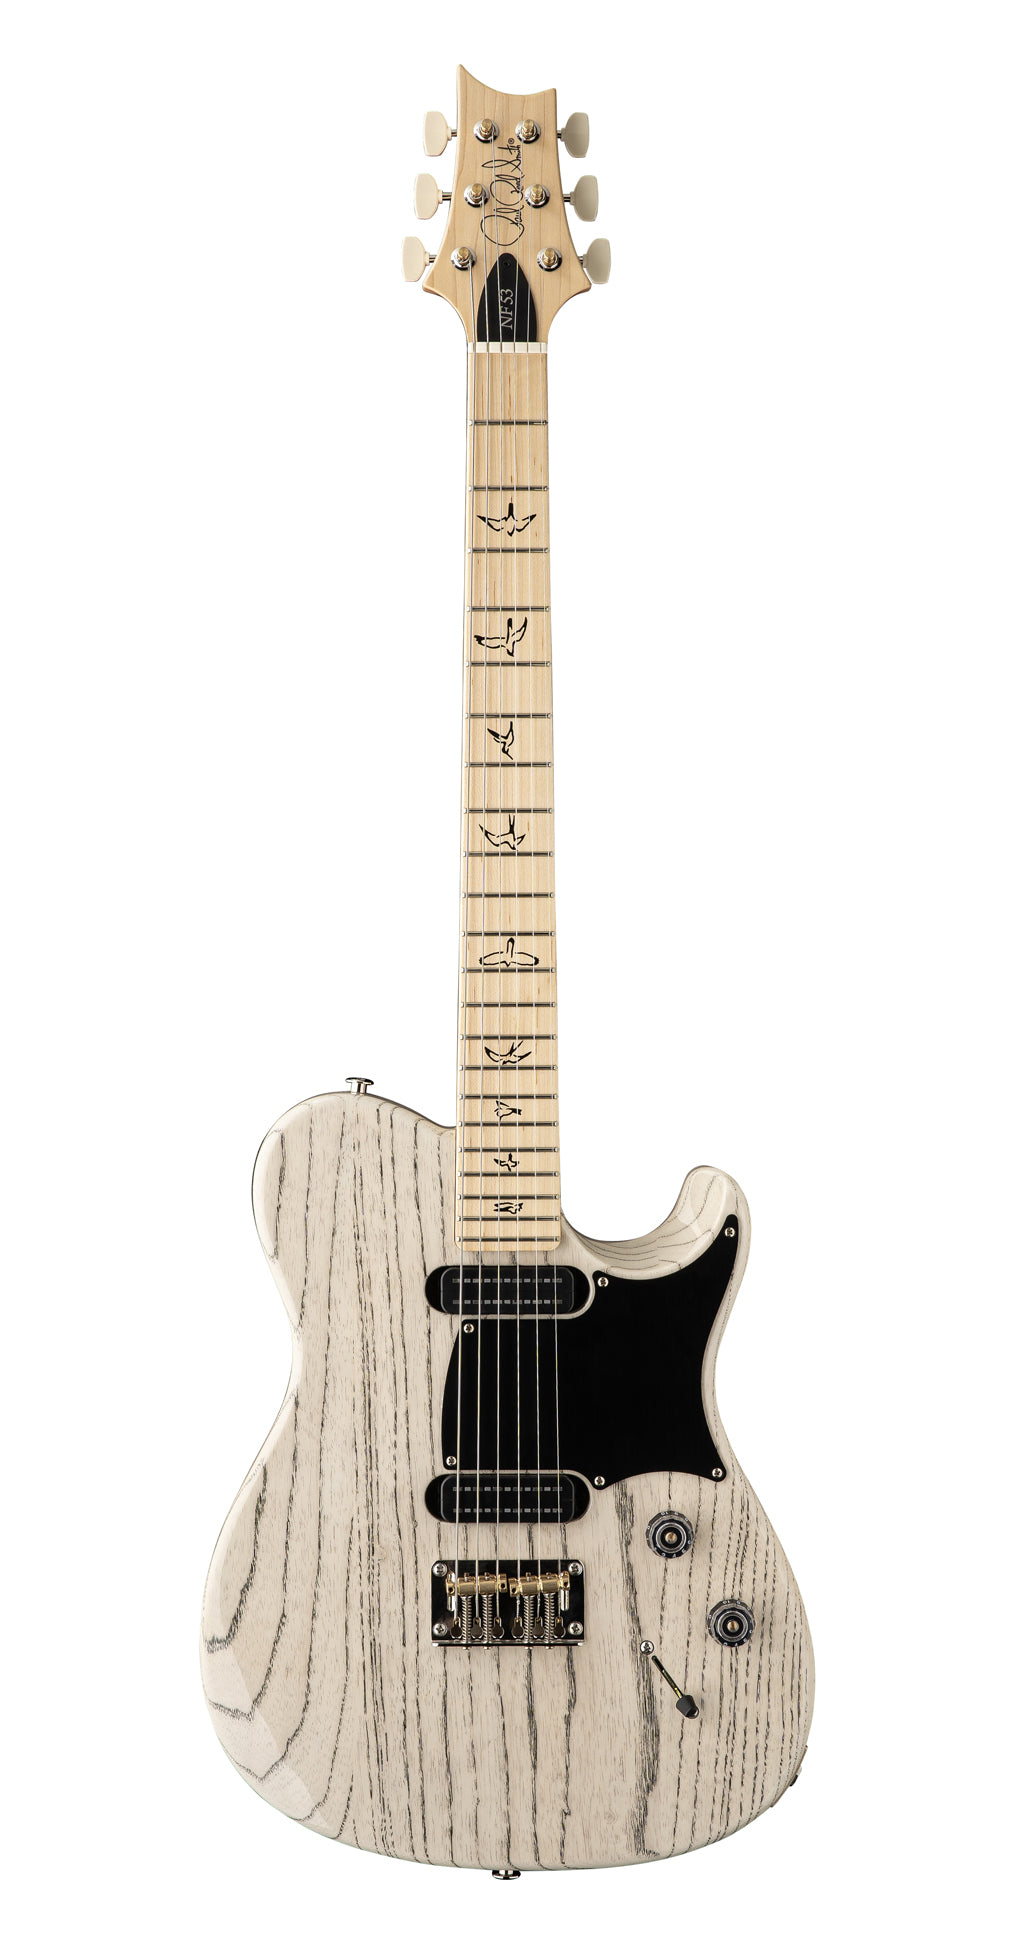 PRS NF 53 - White Doghair